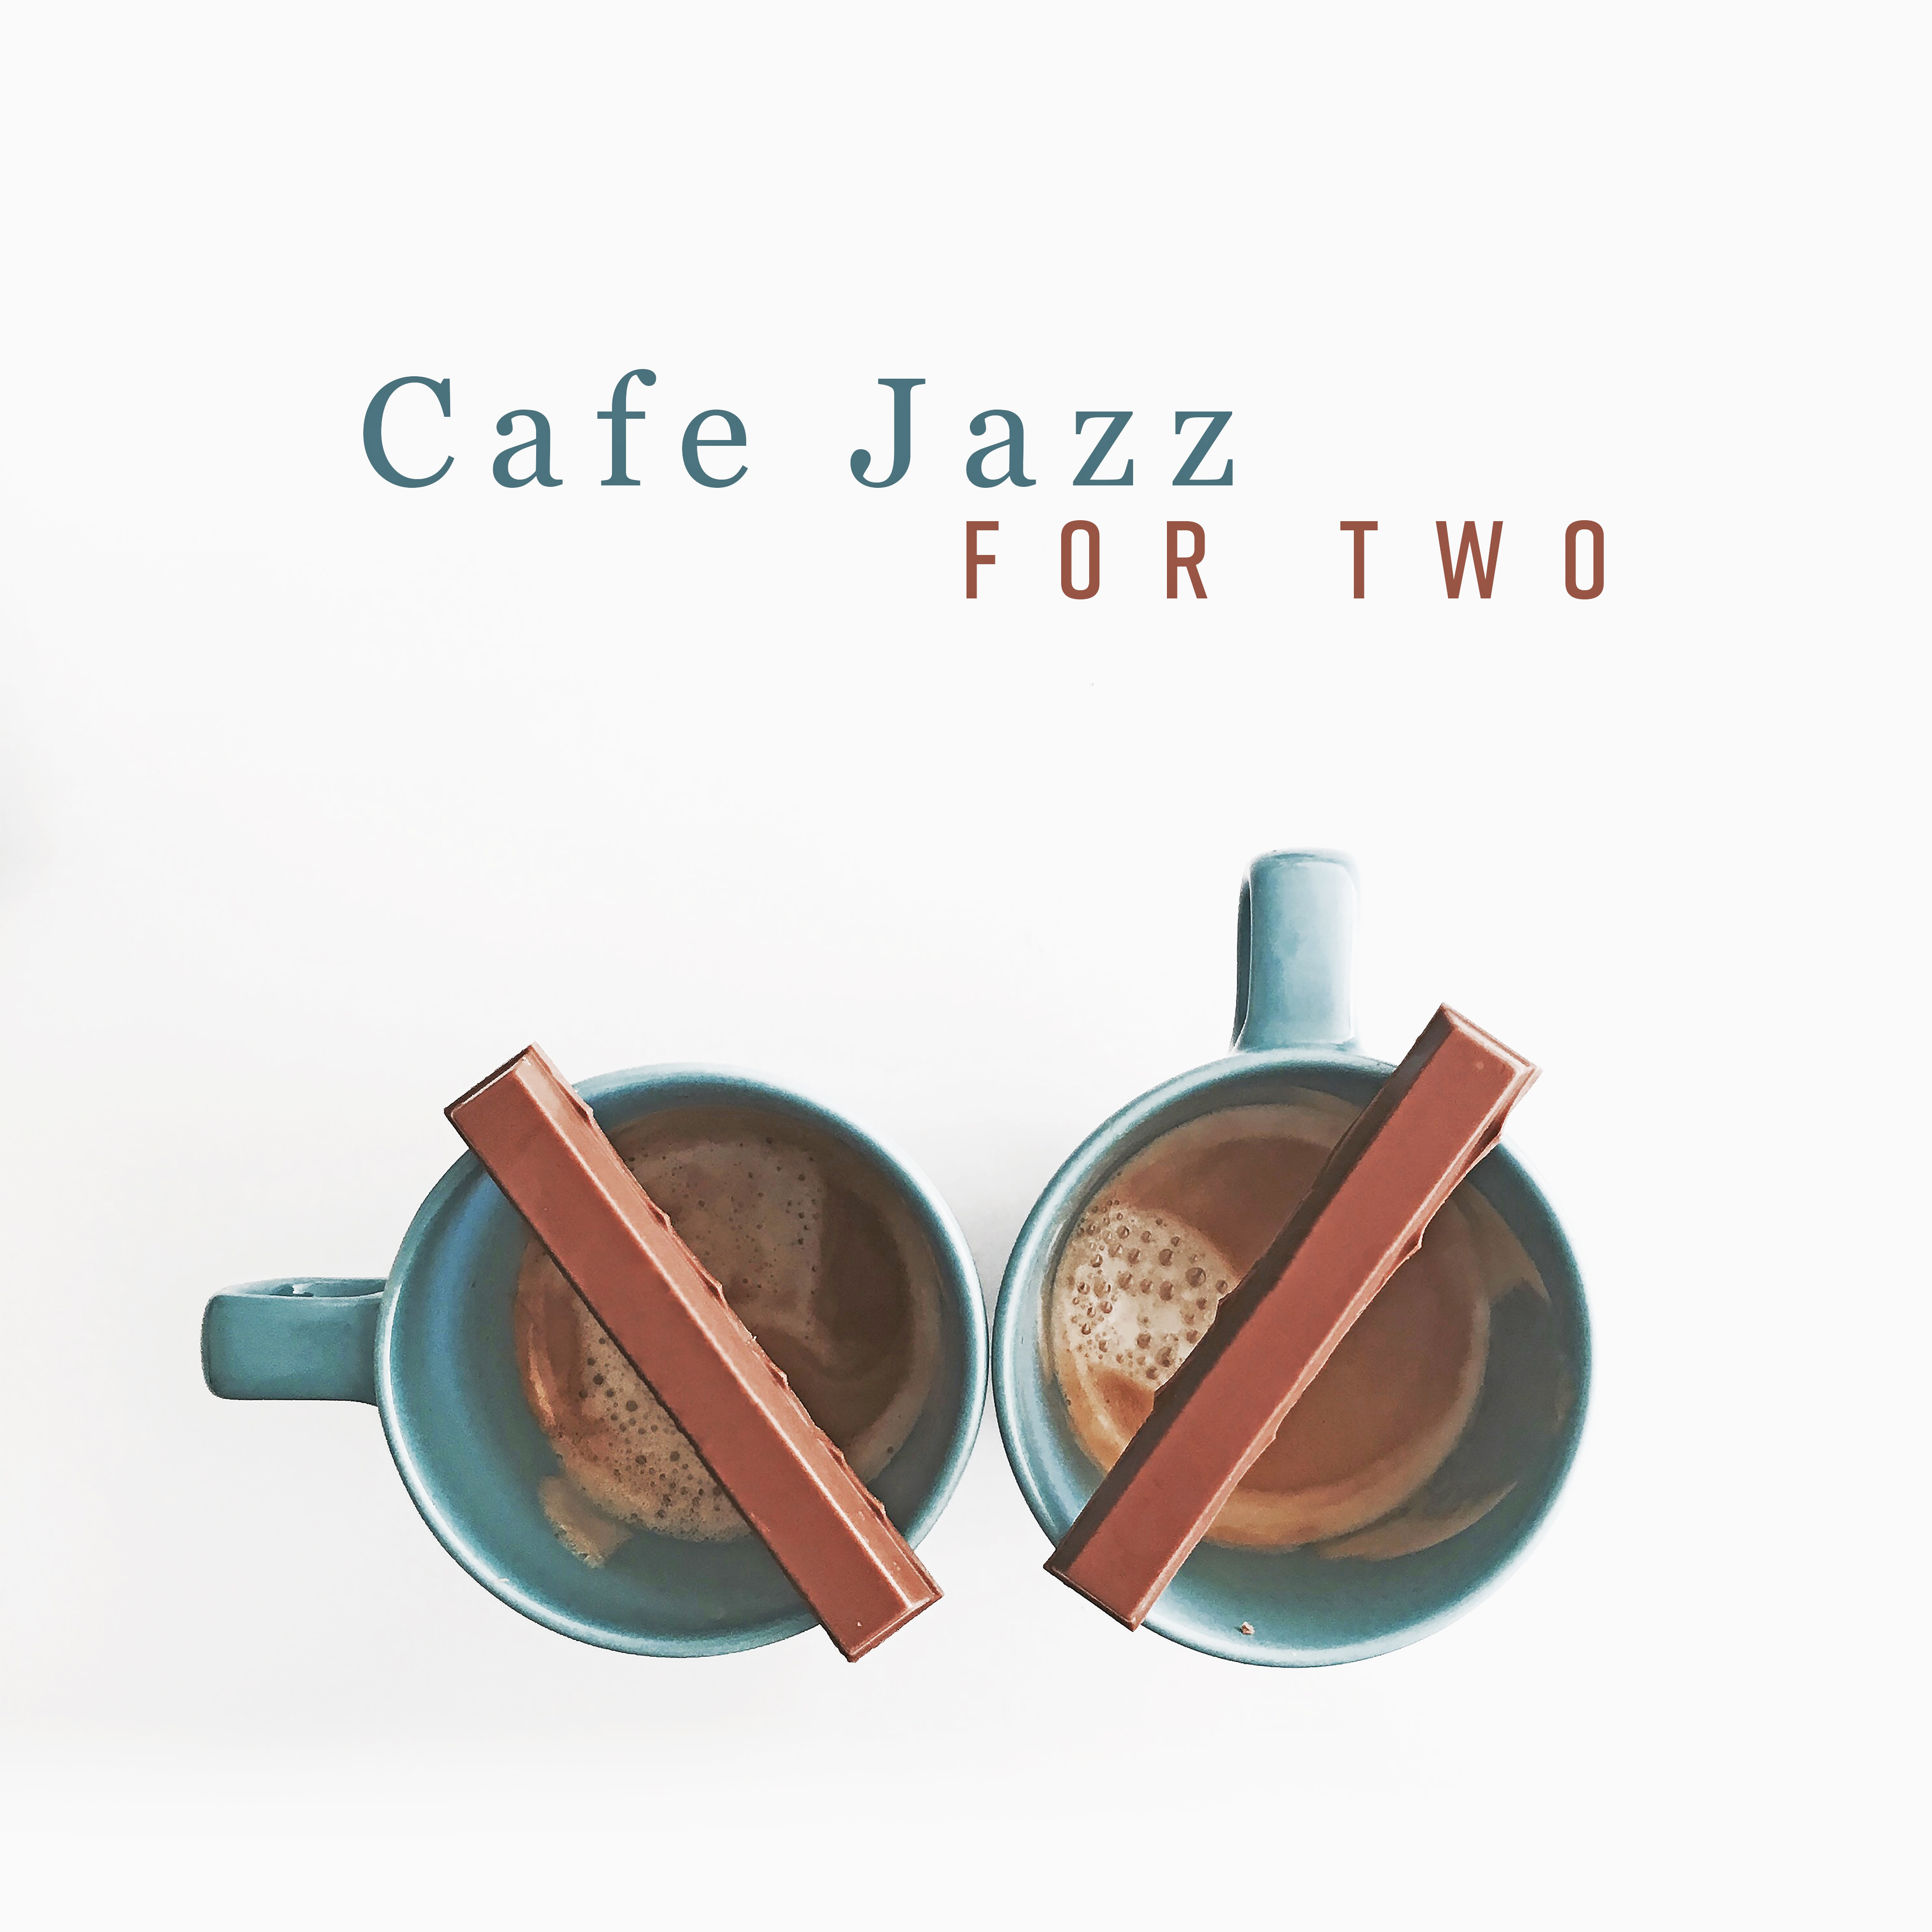 Cafe Jazz for Two